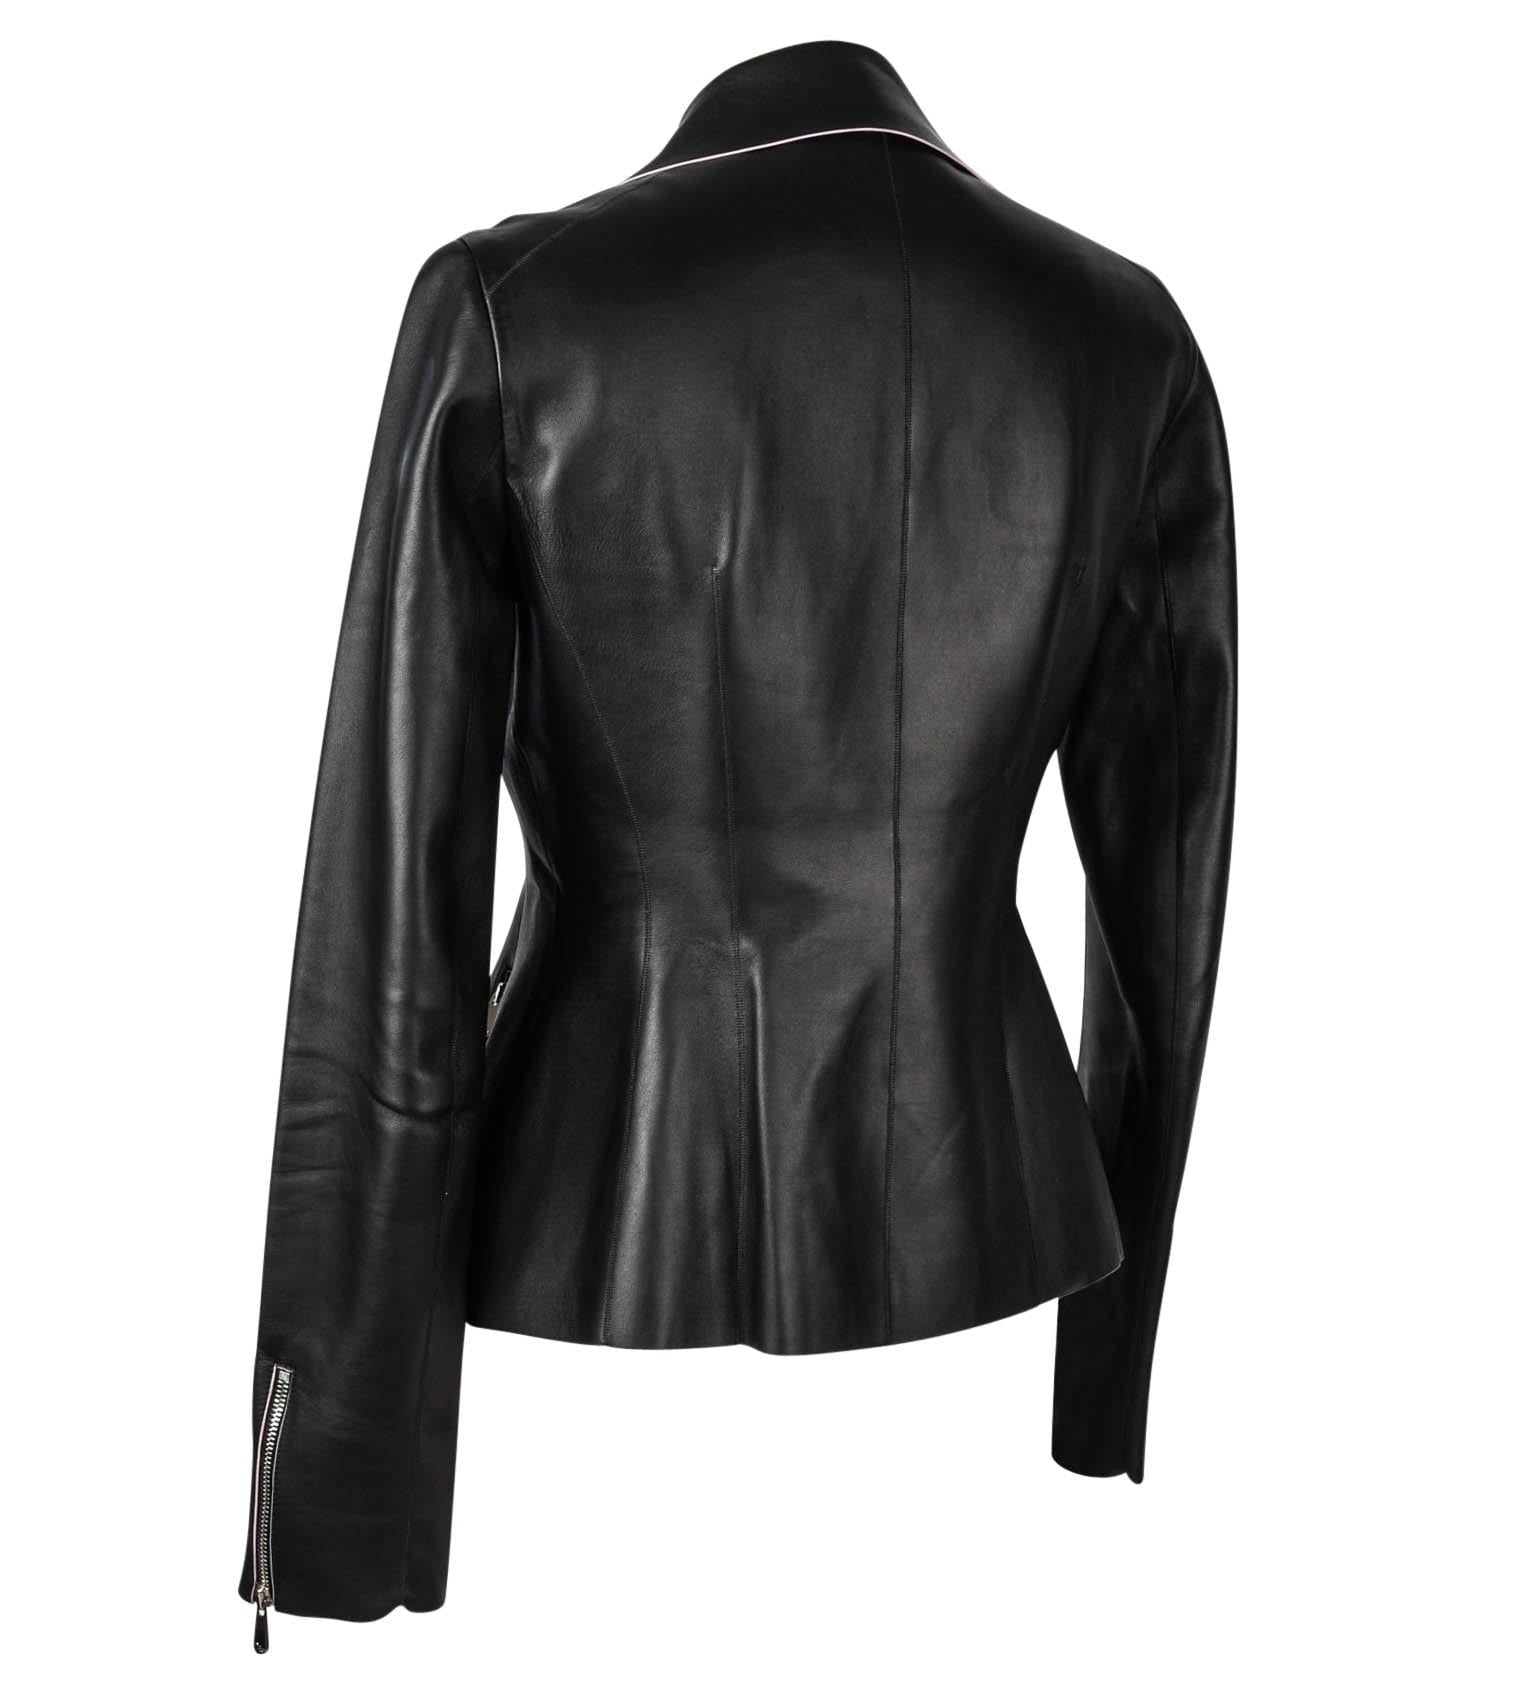 Christian Dior Jacket Black Lambskin Leather Subtle Pink Piping Fits 6 ...